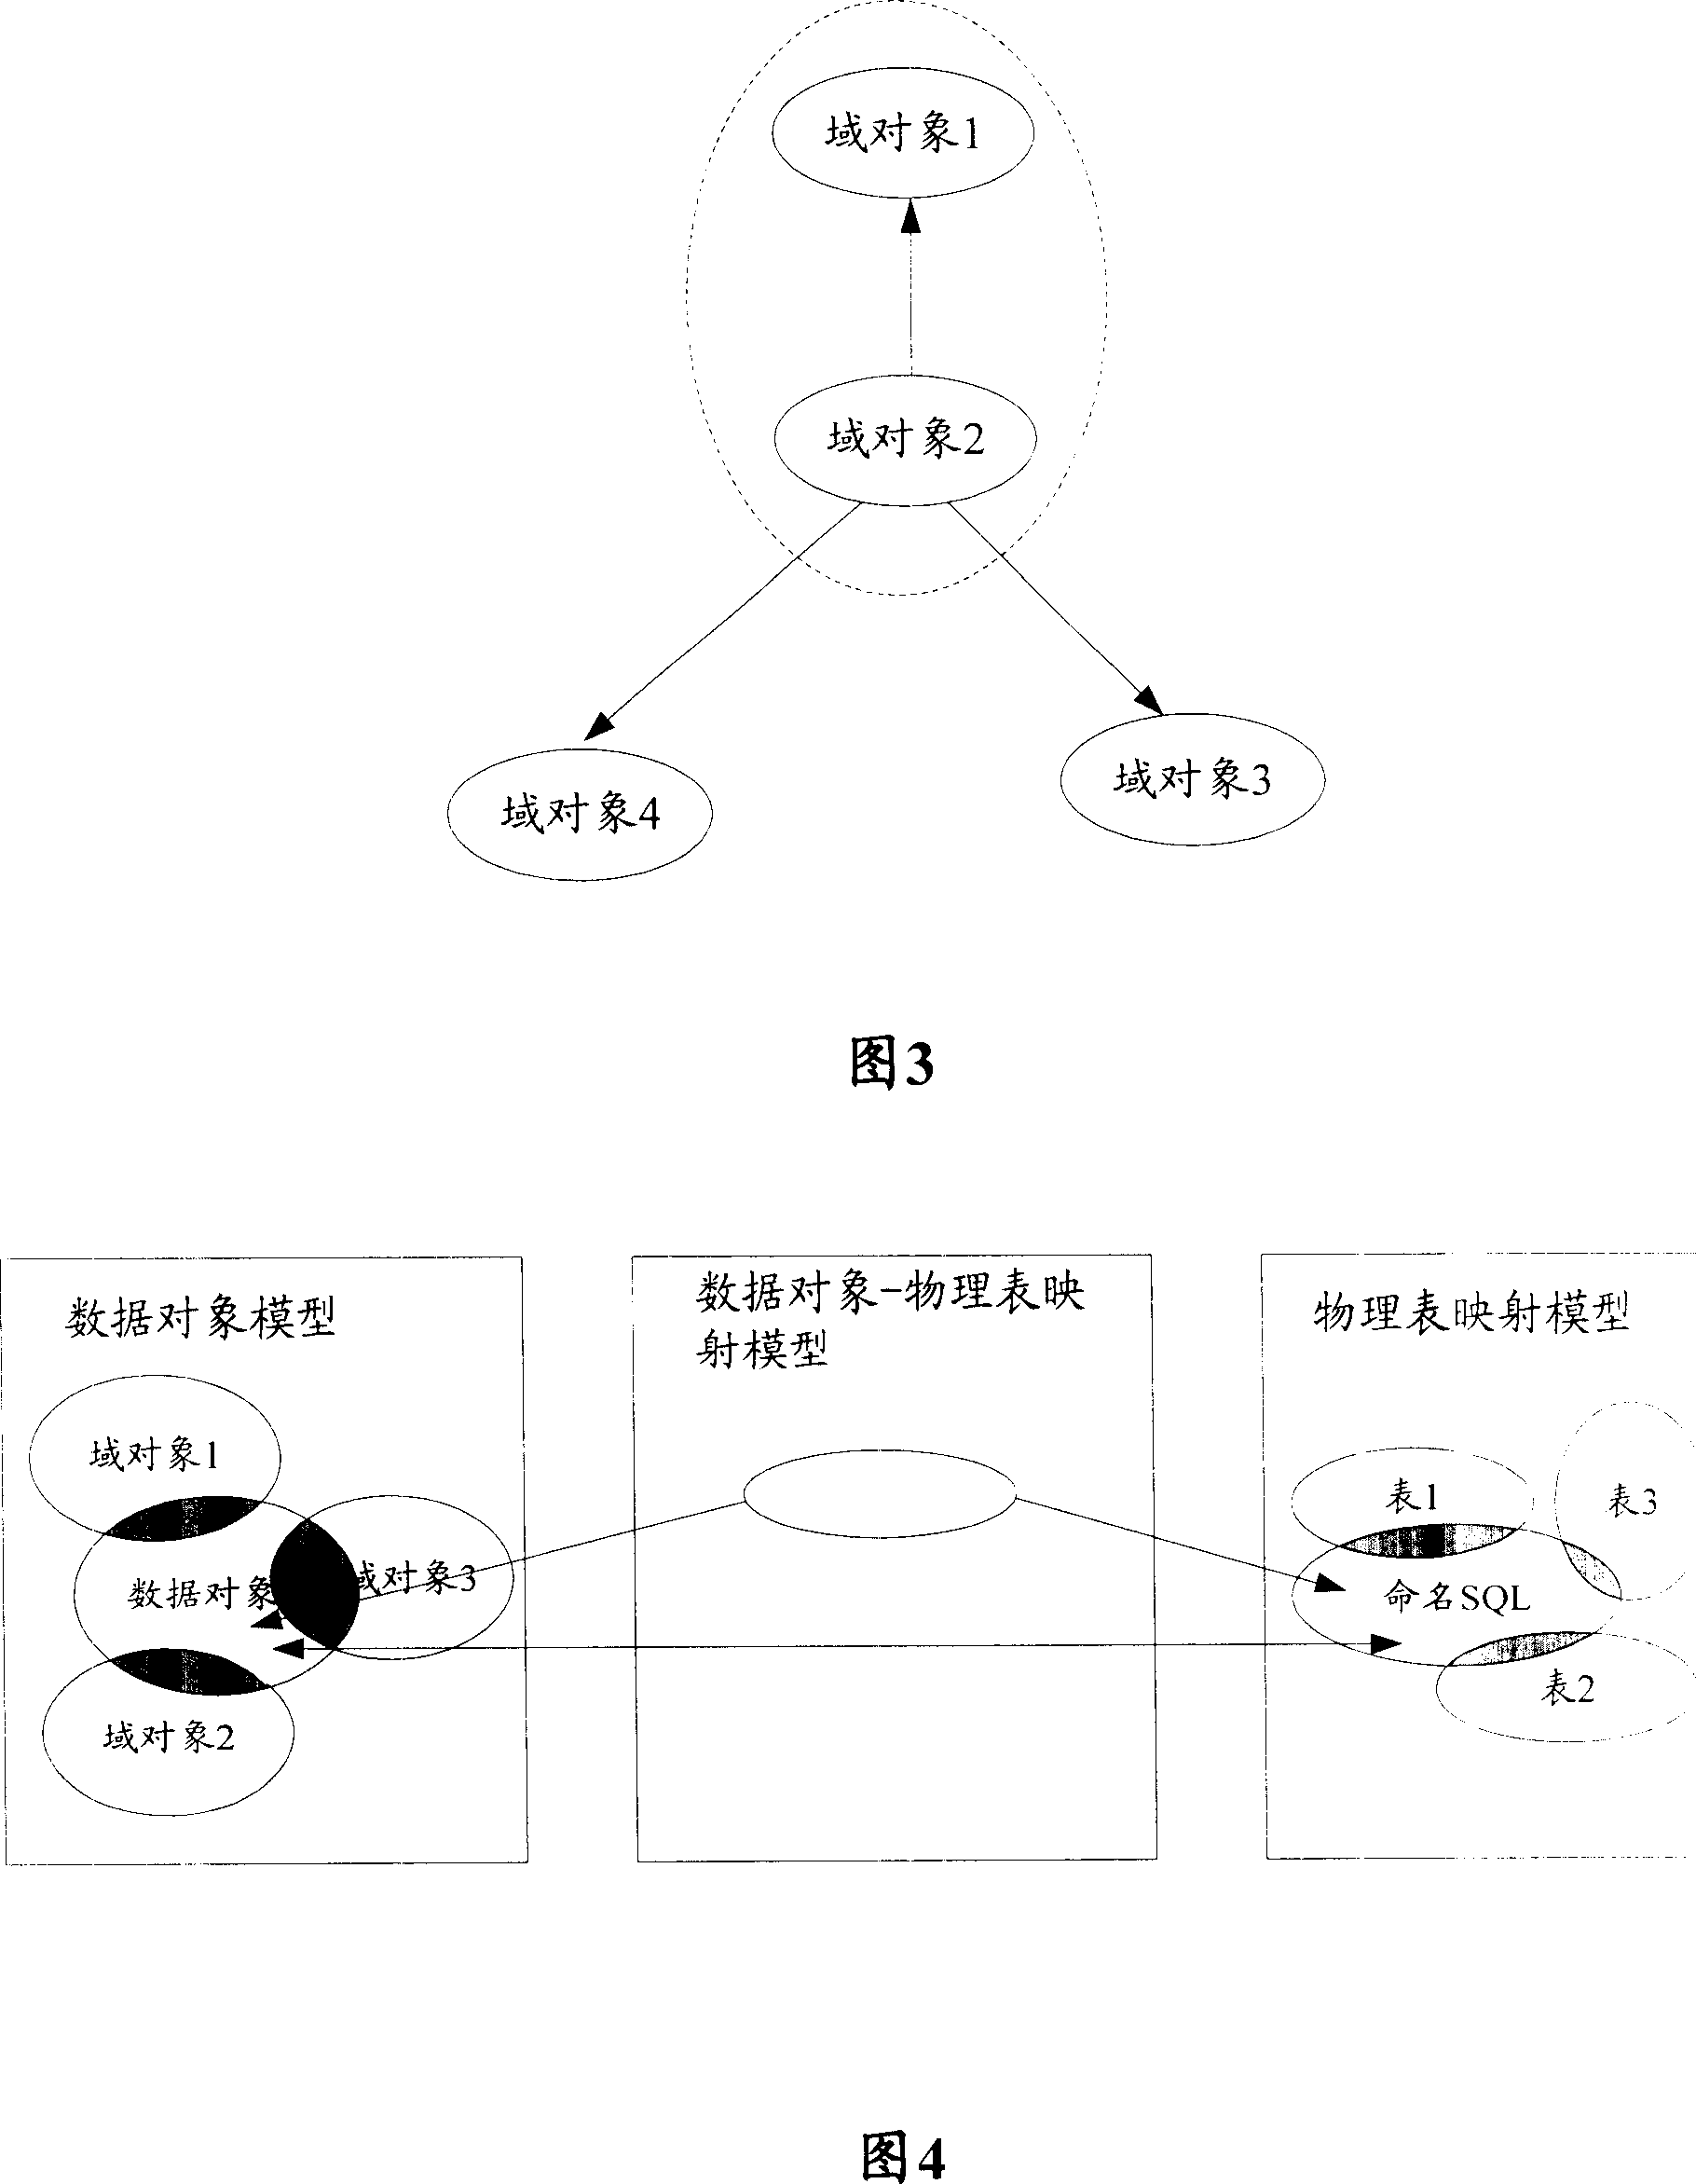 Method and device for set-up disconnection data programmed model and its application